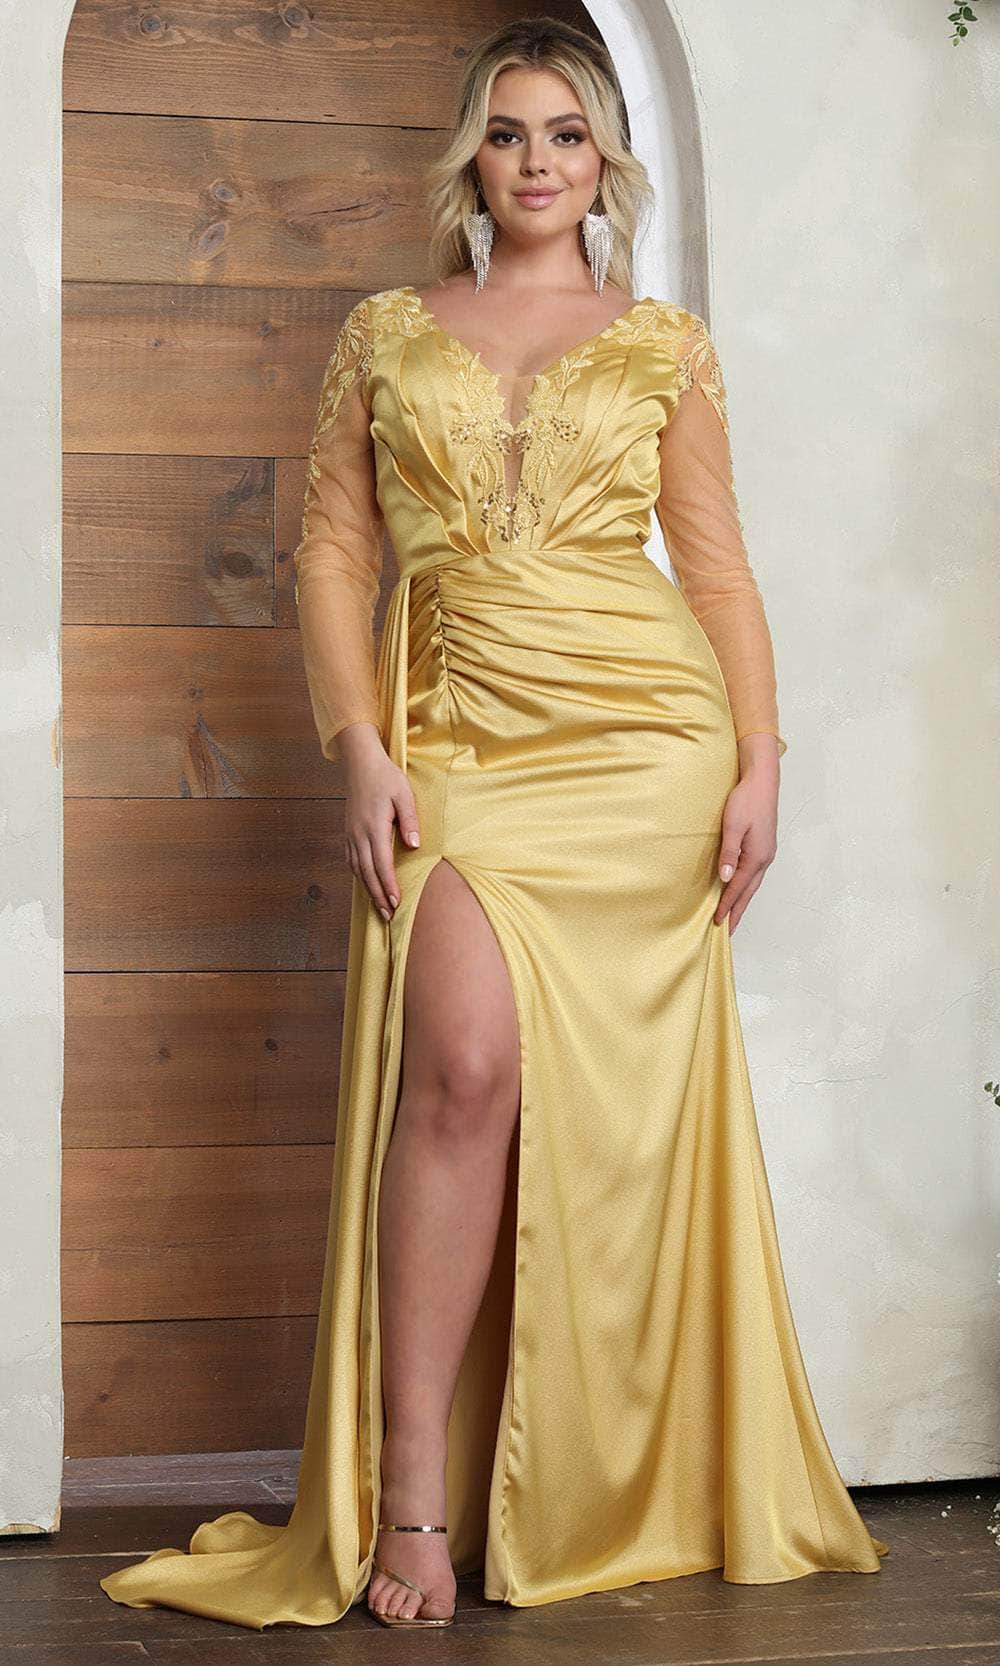 May Queen RQ8045 - Sheer Long Sleeve Ruched Prom Gown Prom Dresses 6 / Gold